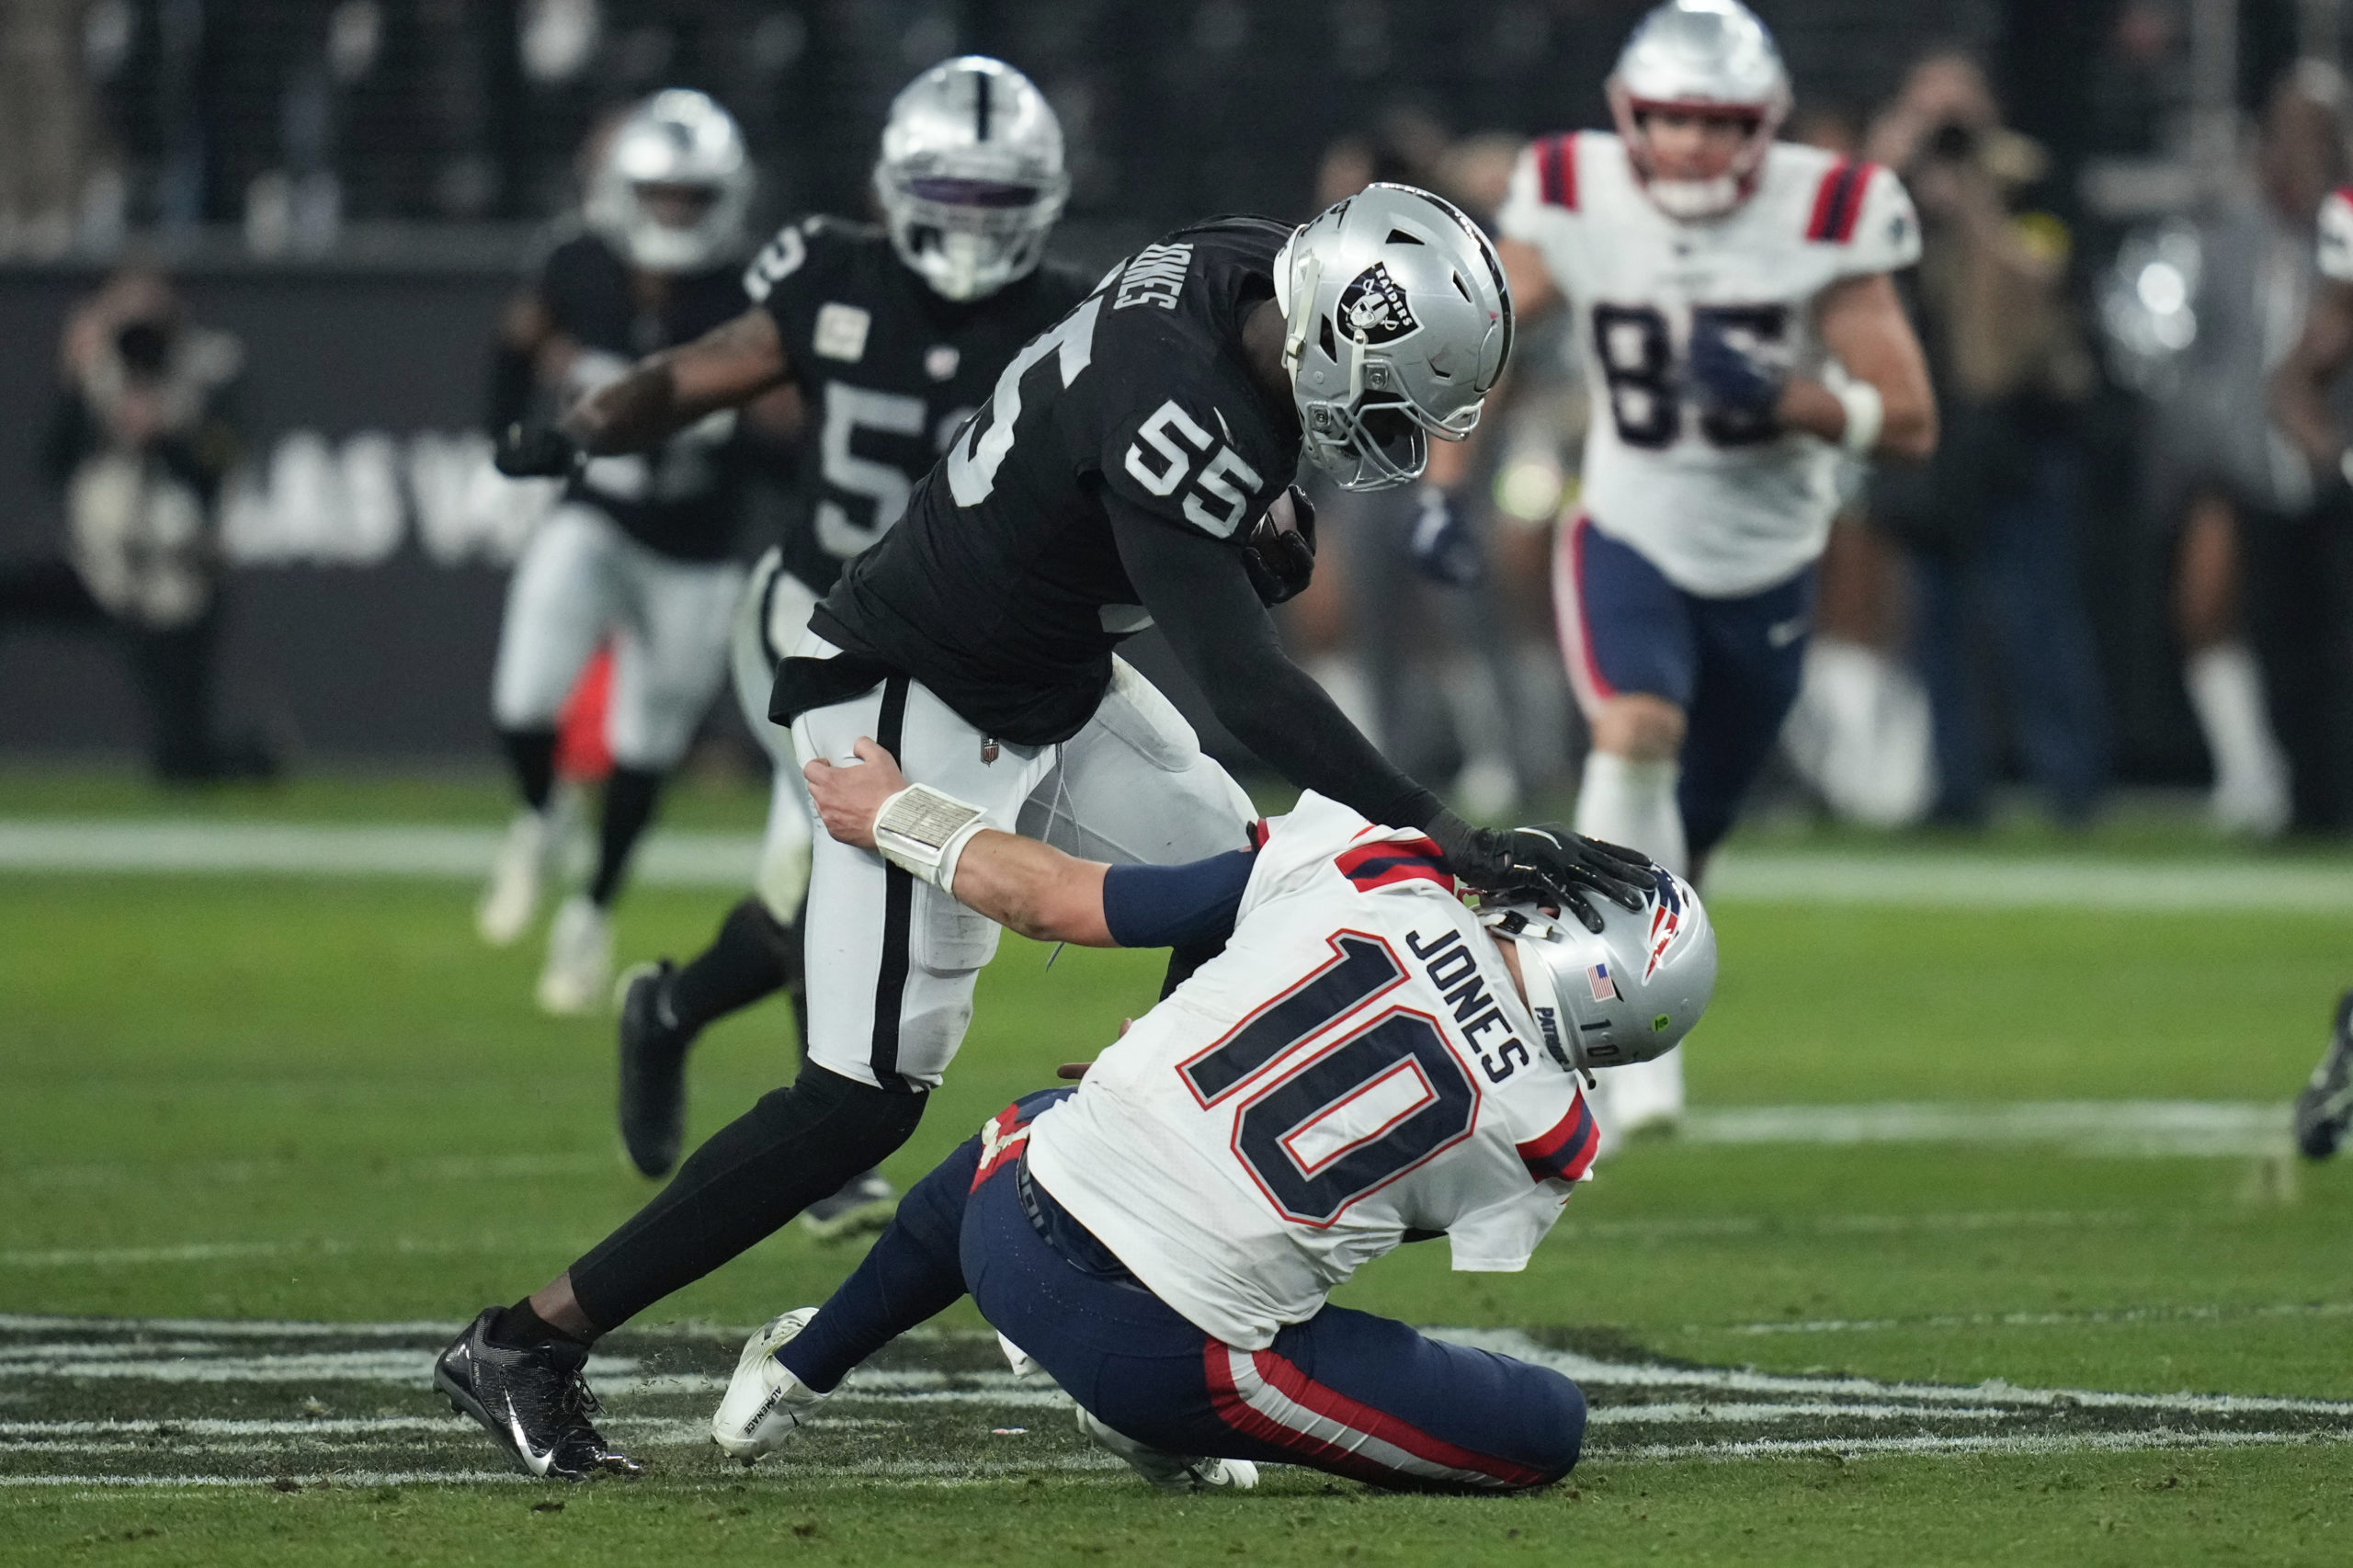 Las Vegas Raiders defensive end Chandler Jones breaks a tackle by New England Patriots quarterback Mac Jones to score a touchdown on an interception during the second half of an NFL football game between the New England Patriots and Las Vegas Raiders in Las Vegas on Sunday.